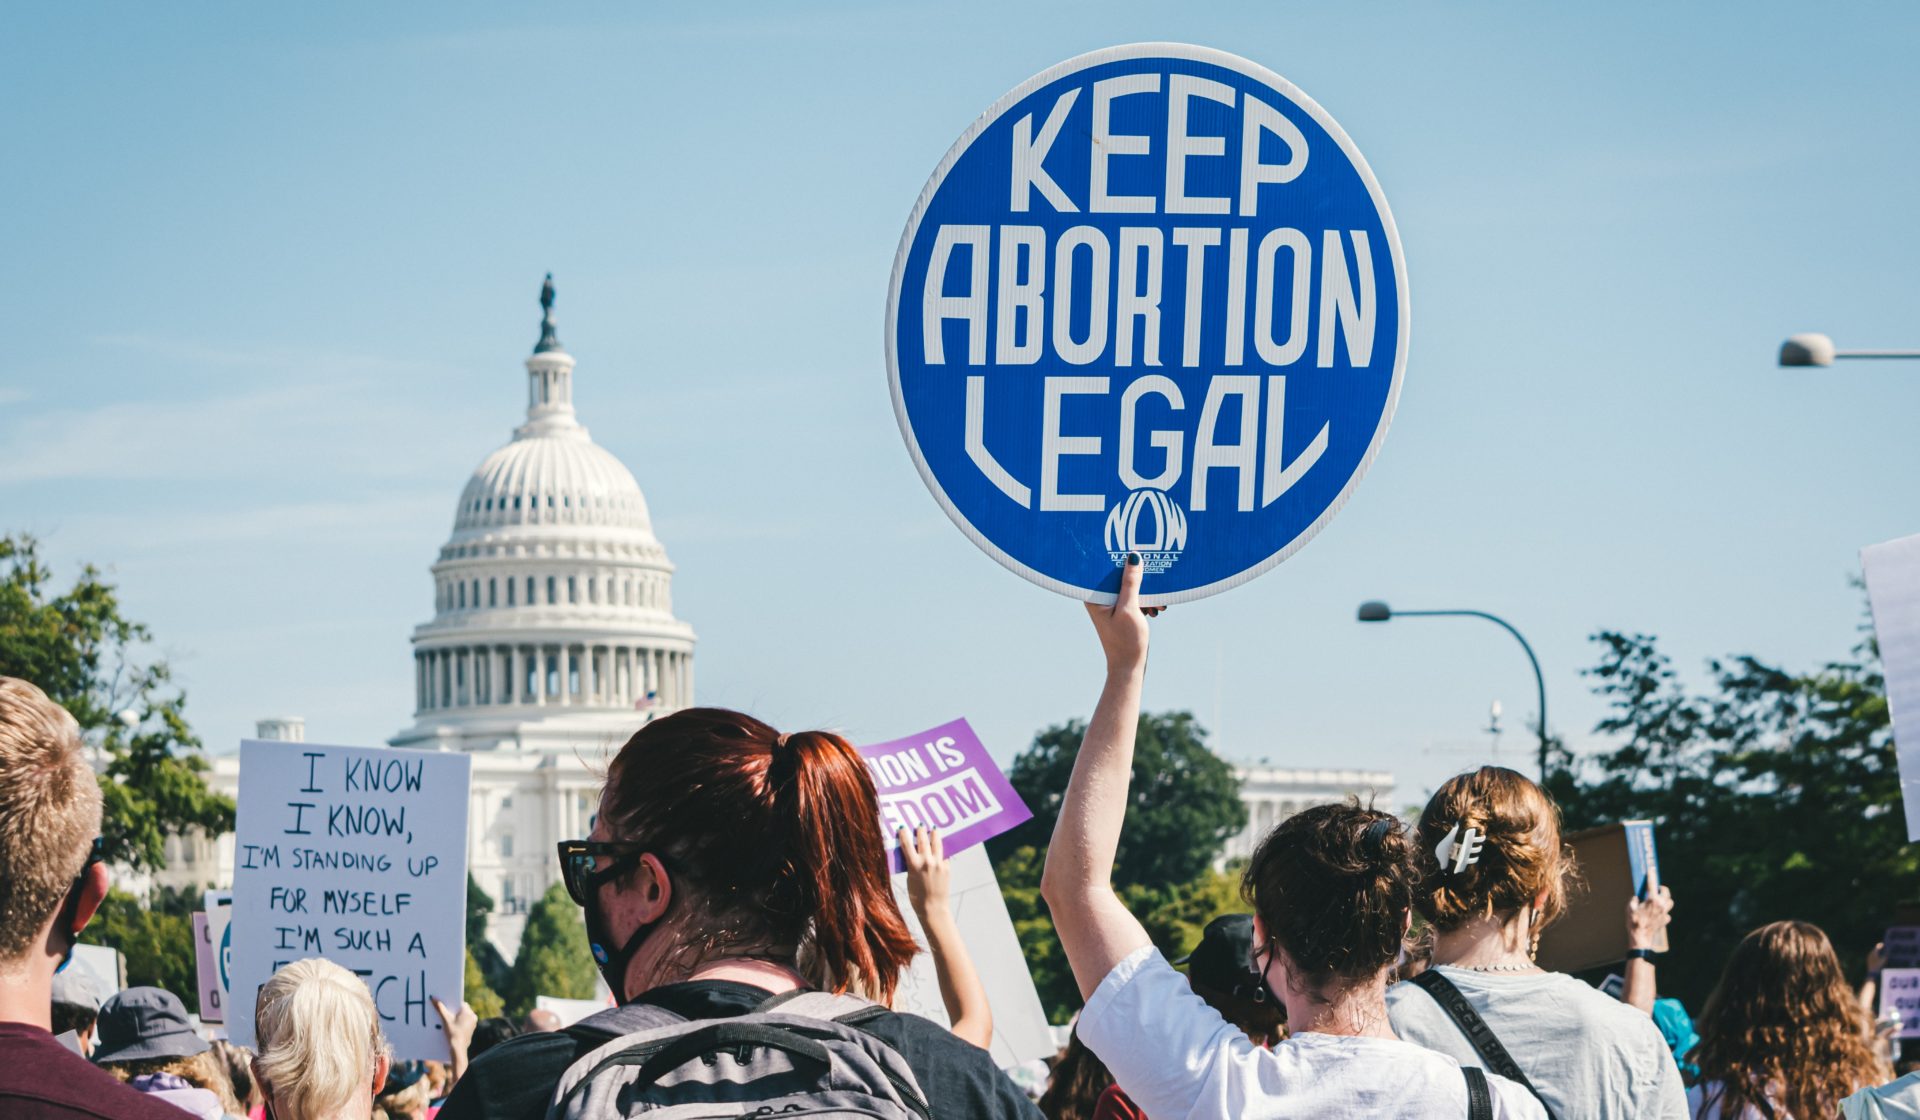 Beauty takes a stand against anti-abortion laws